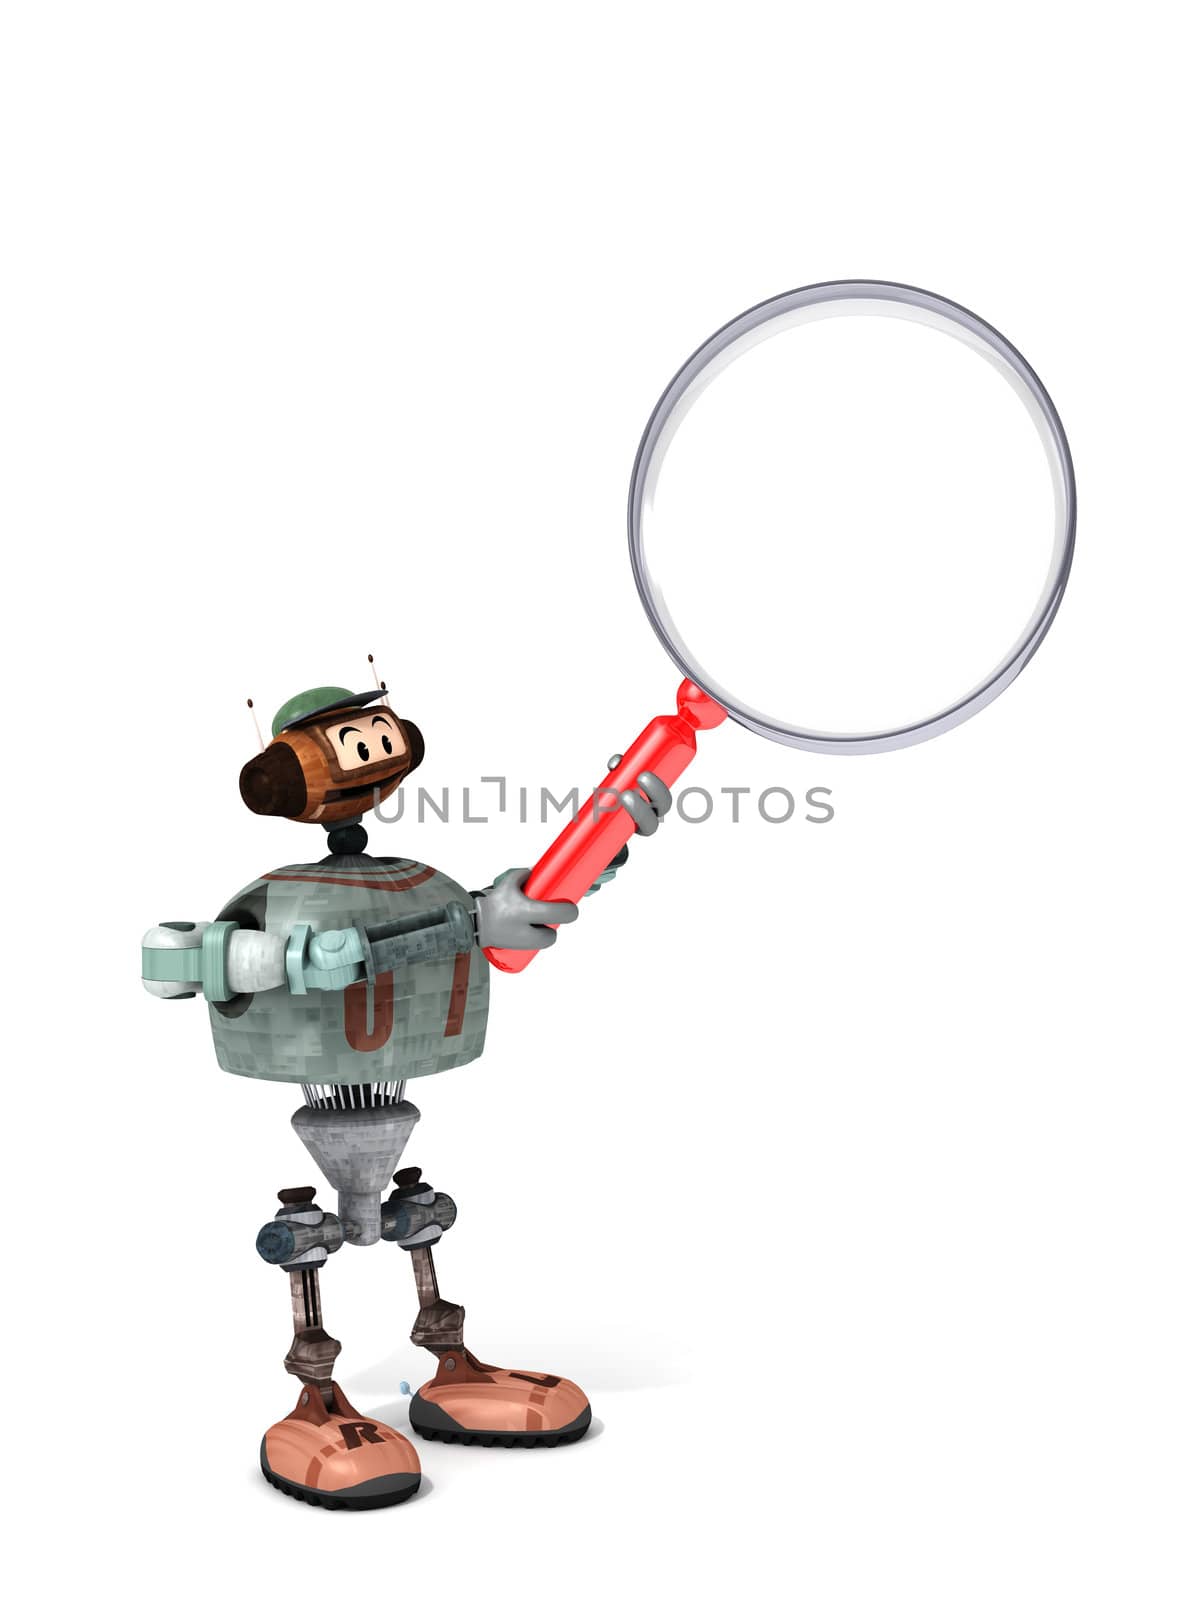 Djoby the Robot Holding Up a Magnifying Glass by shkyo30